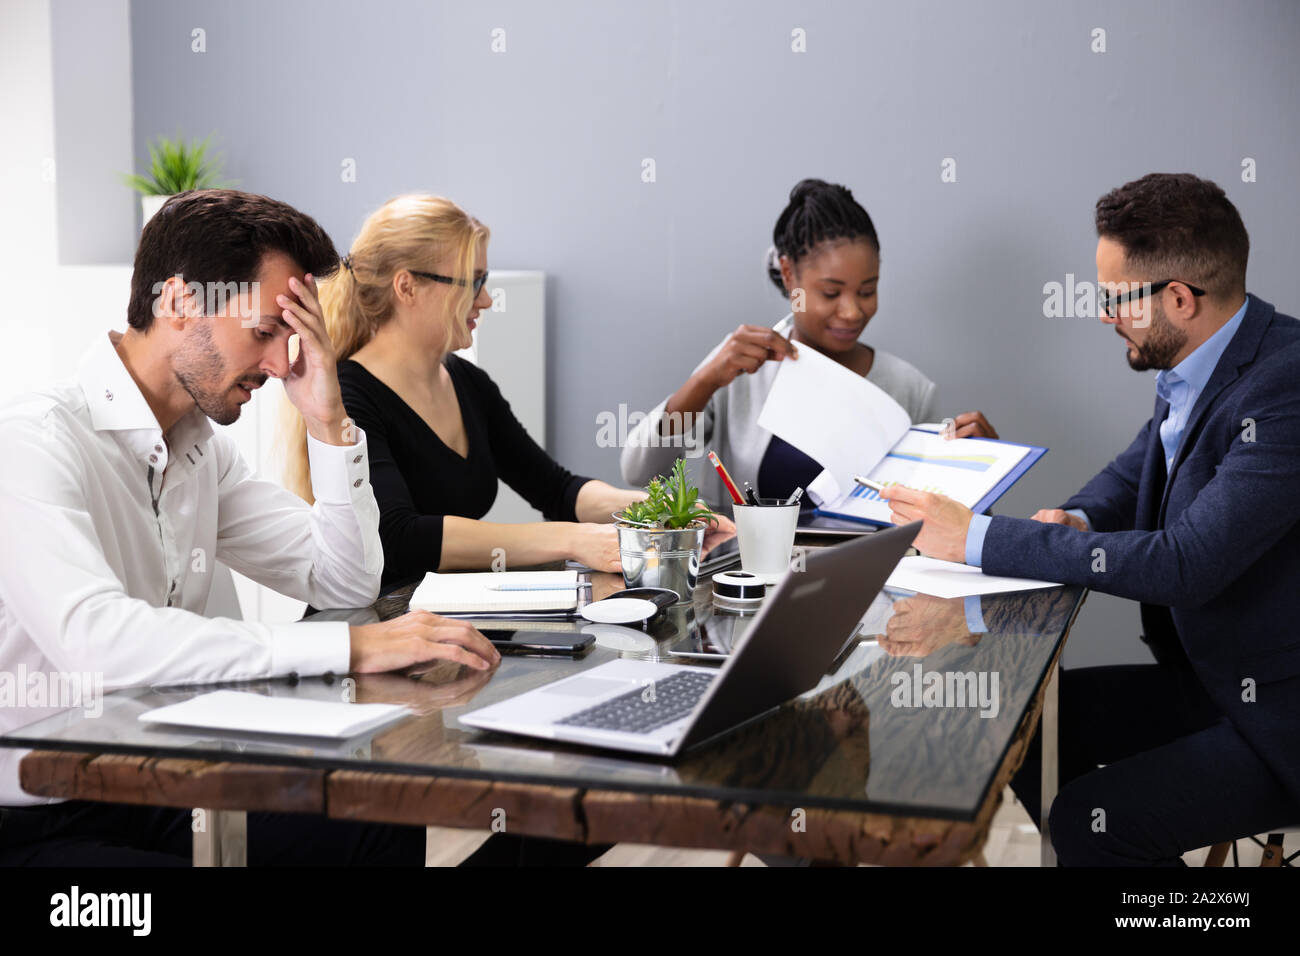 Bored Male Manger Sitting With His Colleagues Giving Presentation In Meeting At Office Stock Photo